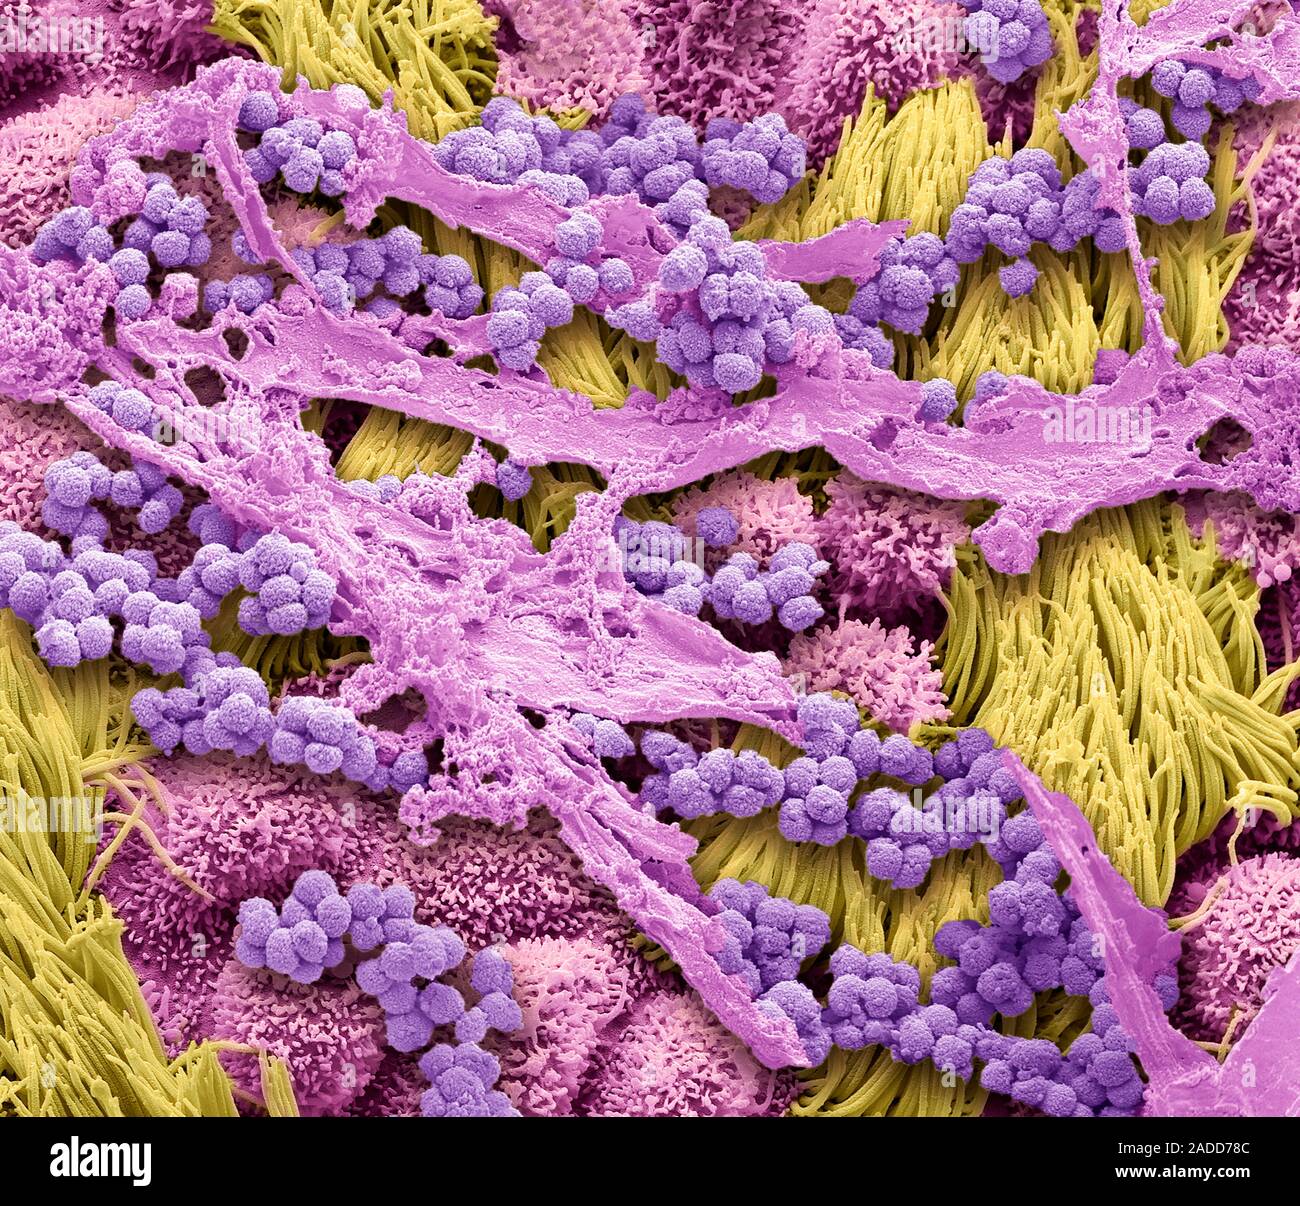 Phlegm in the airway. Scanning electron micrograph (SEM) composition of ...